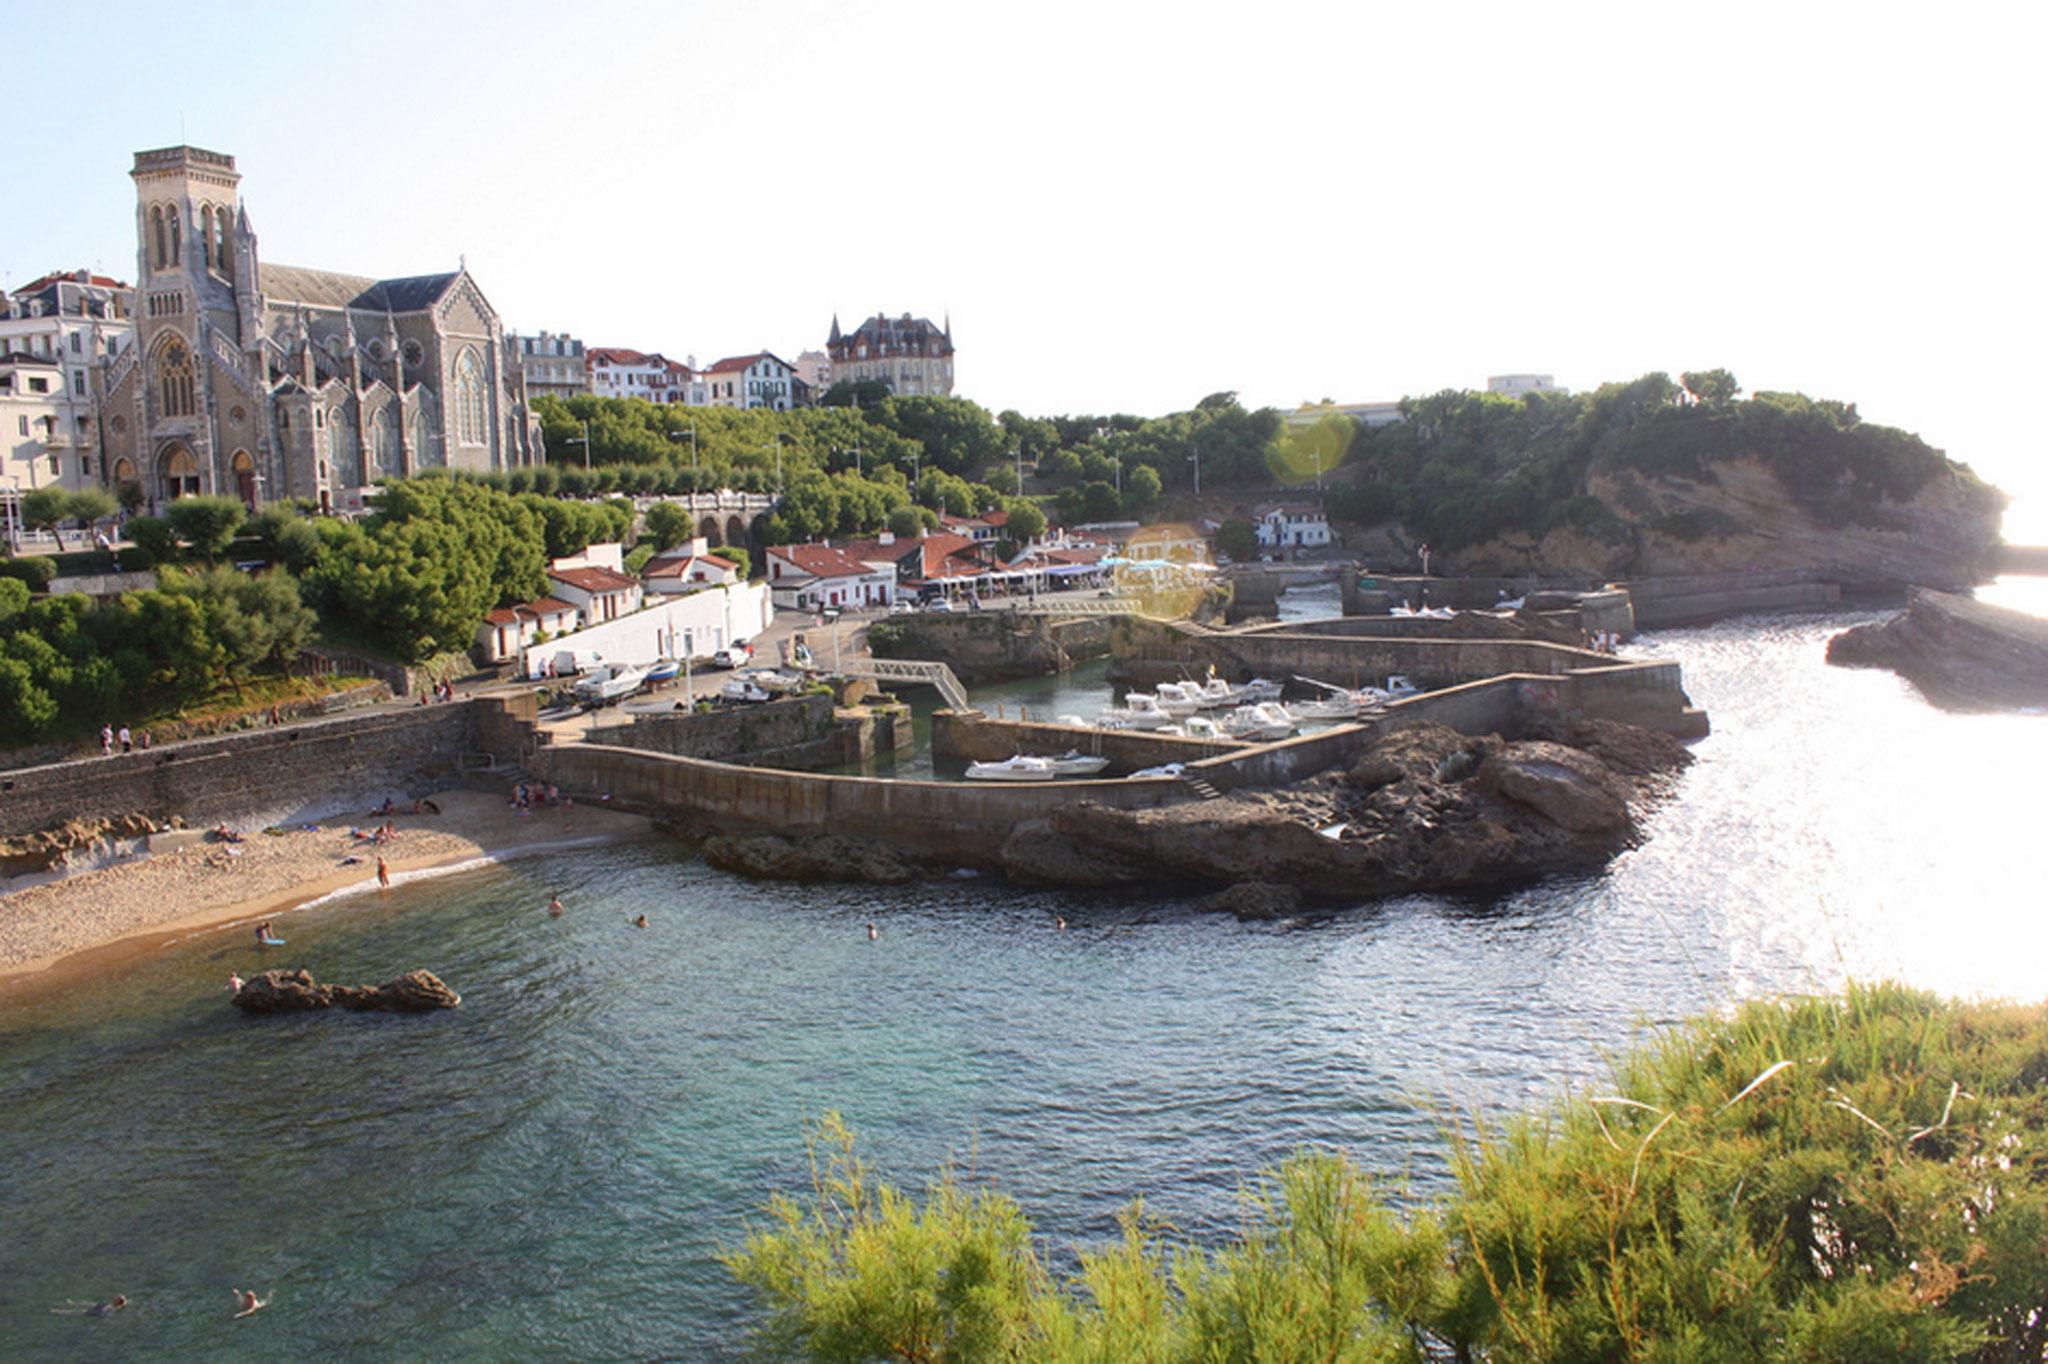 Biarritz might have once been seen as the playground for the rich, but the French coastal town is proving popular with water sports enthusiasts and is the home to many cultural and music related events